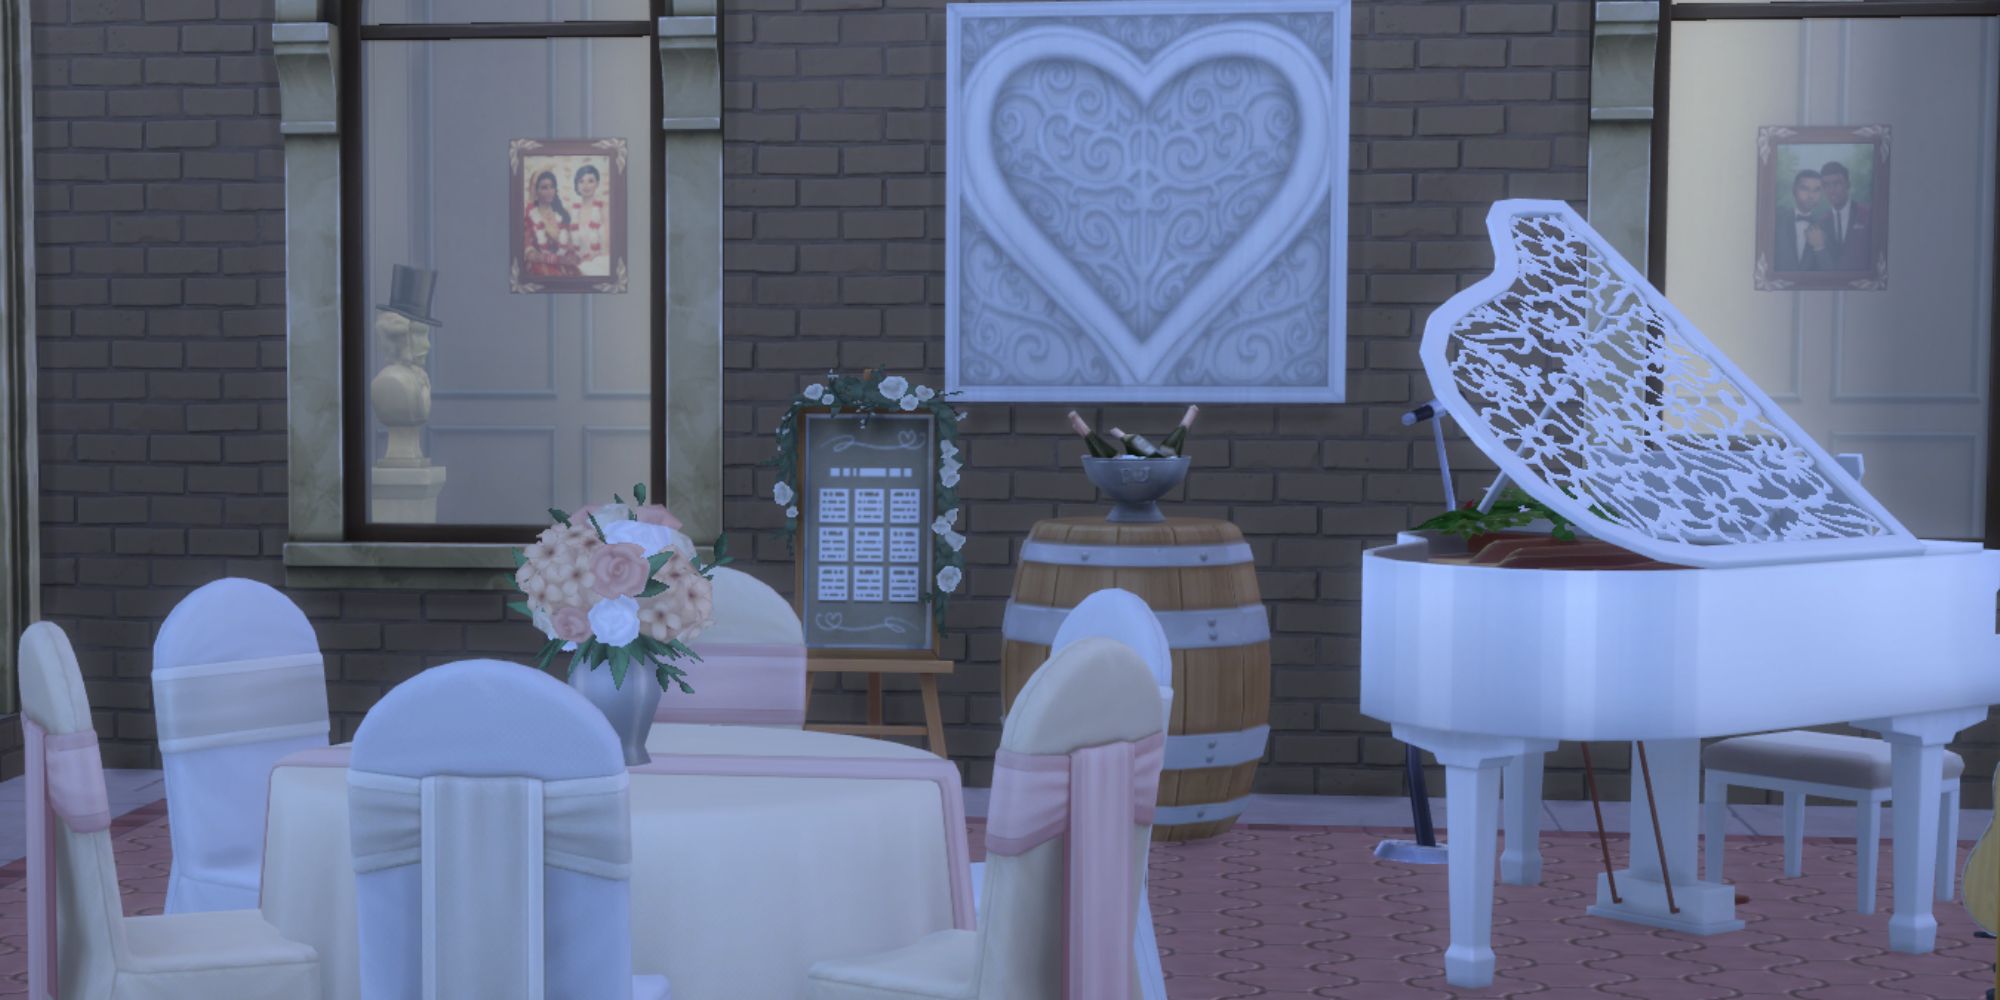 Sims 4 wedding piano toasts and tables in venue